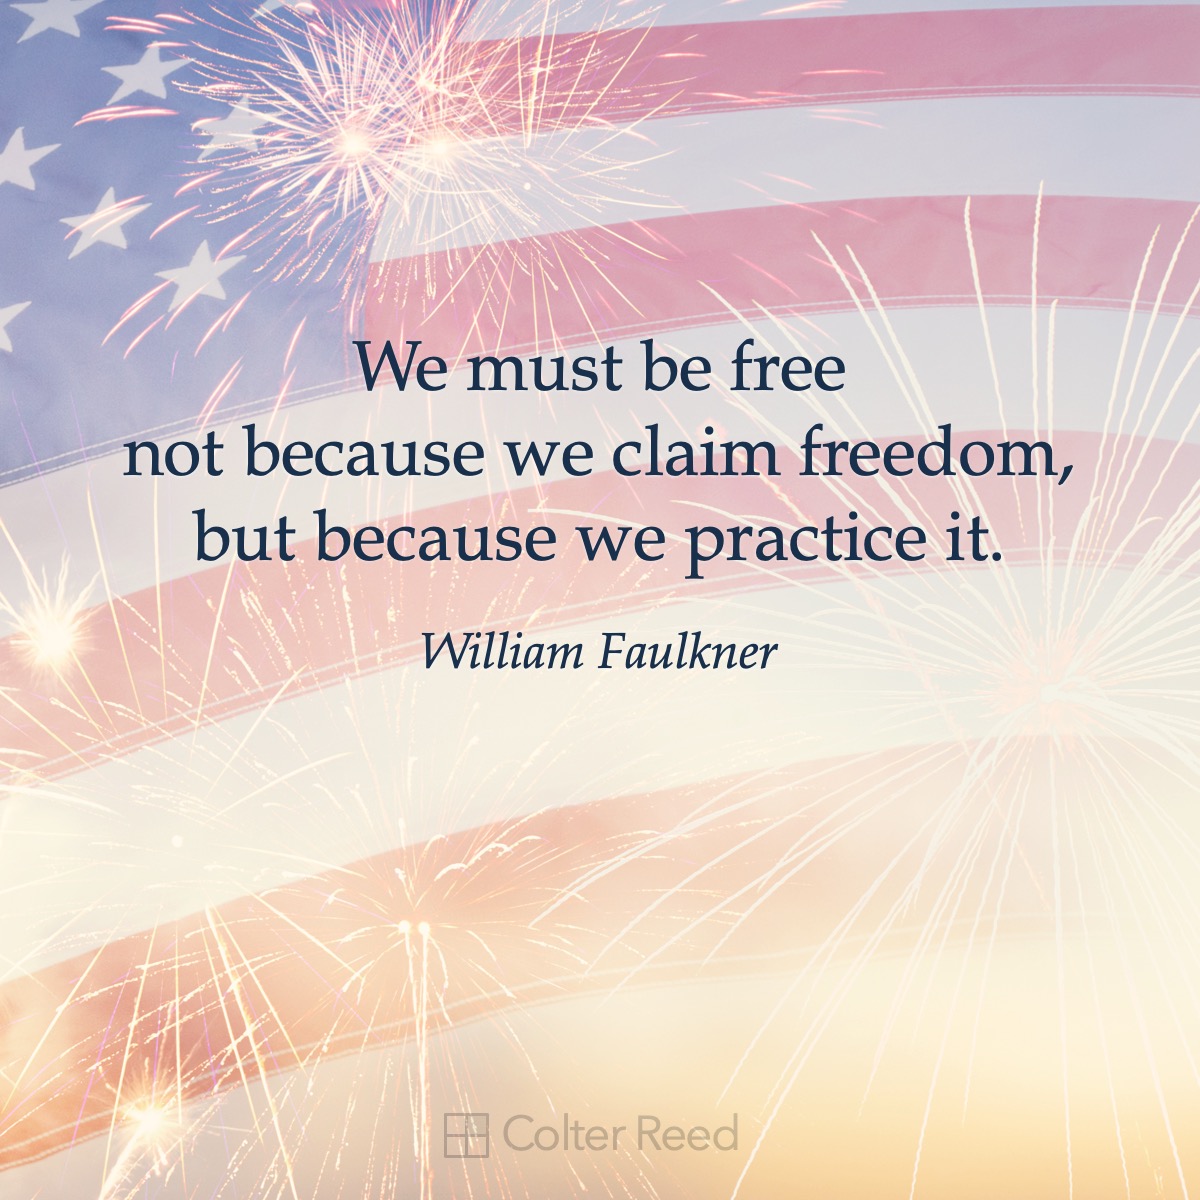 We must be free not because we claim freedom, but because we practice it. —William Faulkner